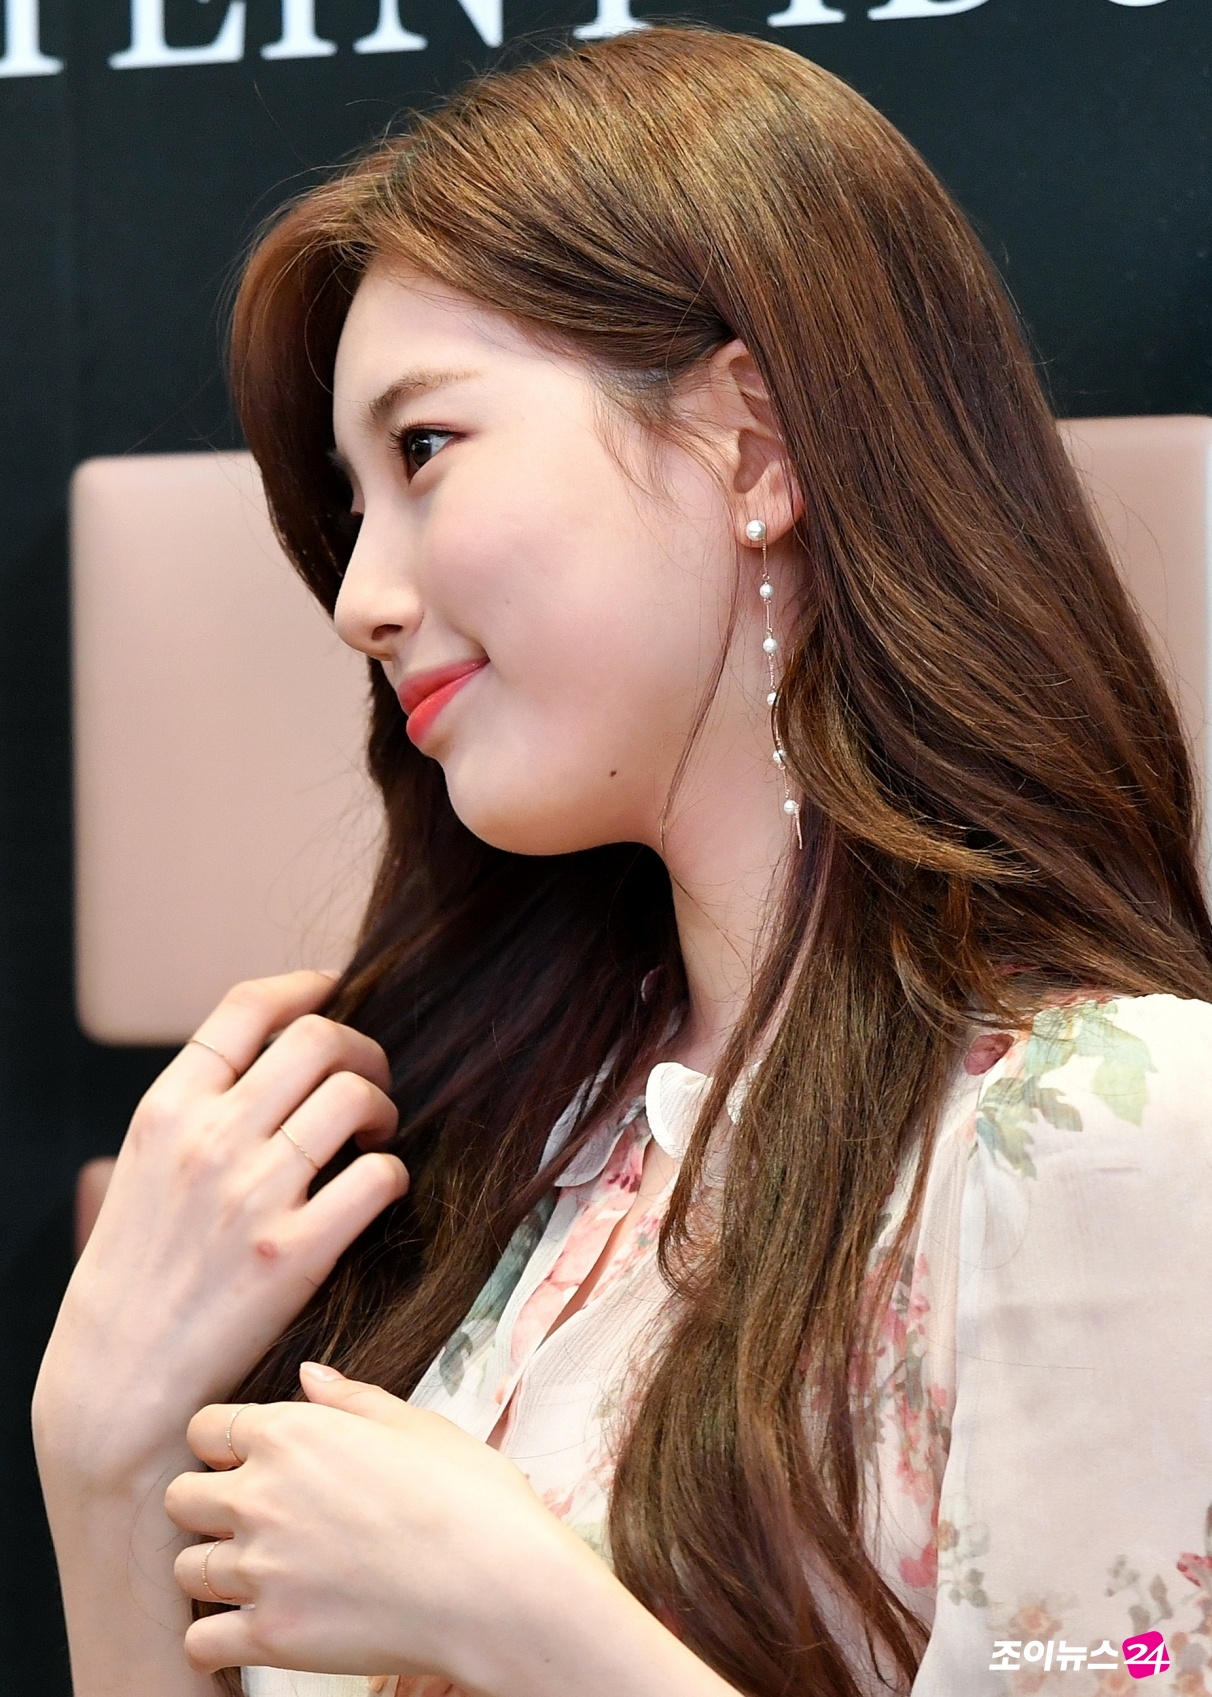 Actor and singer Bae Suzy poses at the Global Beauty Brand Lancome Photo Call Event held at Myeongdong branch of Shinsegae Duty Free Shop in Jung-gu, Seoul on the afternoon of the 19th.Lancome held a Make-up event at the event hall to commemorate the launch of the global campaign of Make-Up Is My Power (MAKE UP IS MY POWER) of the new foundation line Edol Long Rasting Foundation.